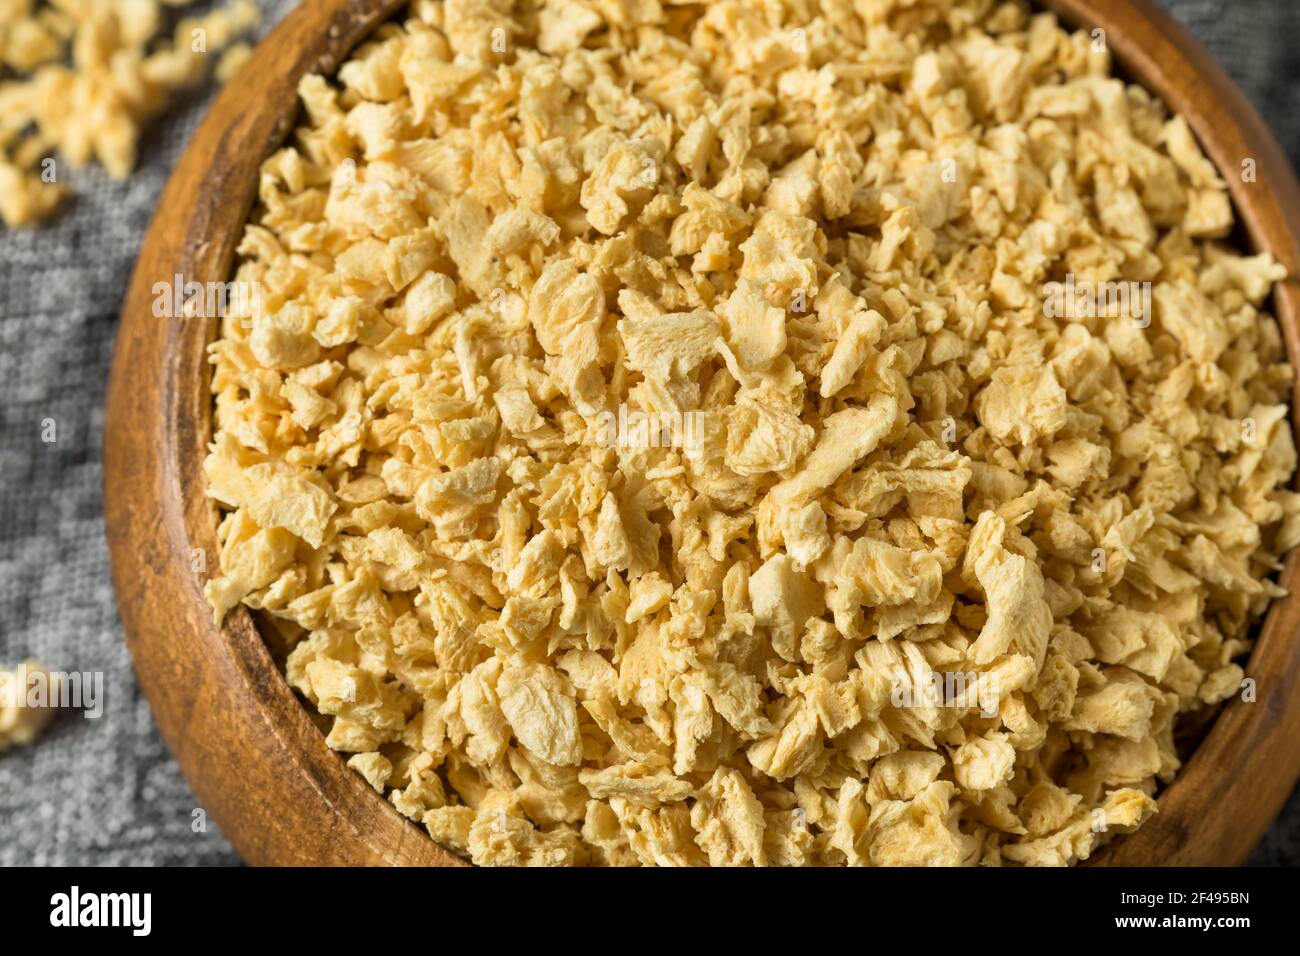 Raw Organic Textured Vegetable Protein TVP in a Bowl Stock Photo